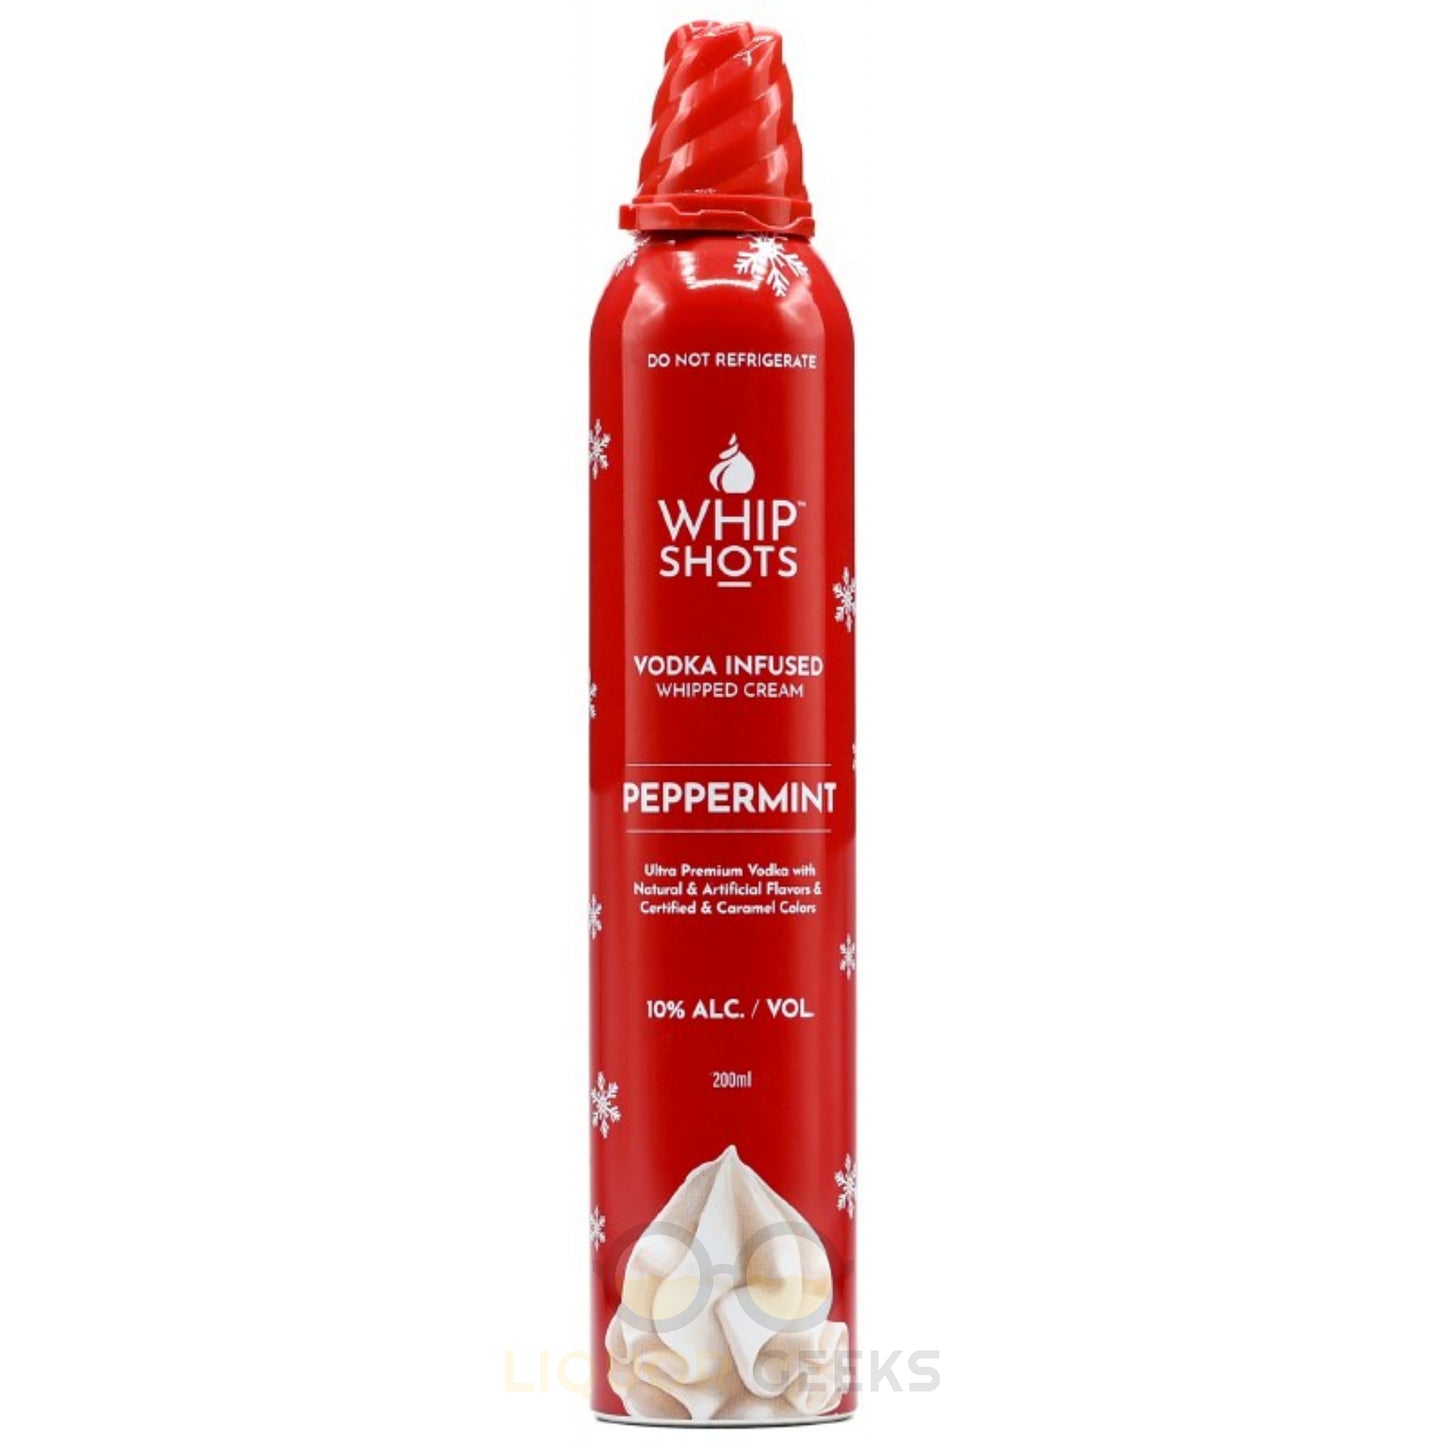 Whipshots Vodka Infused Whipped Cream-Peppermint - Liquor Geeks